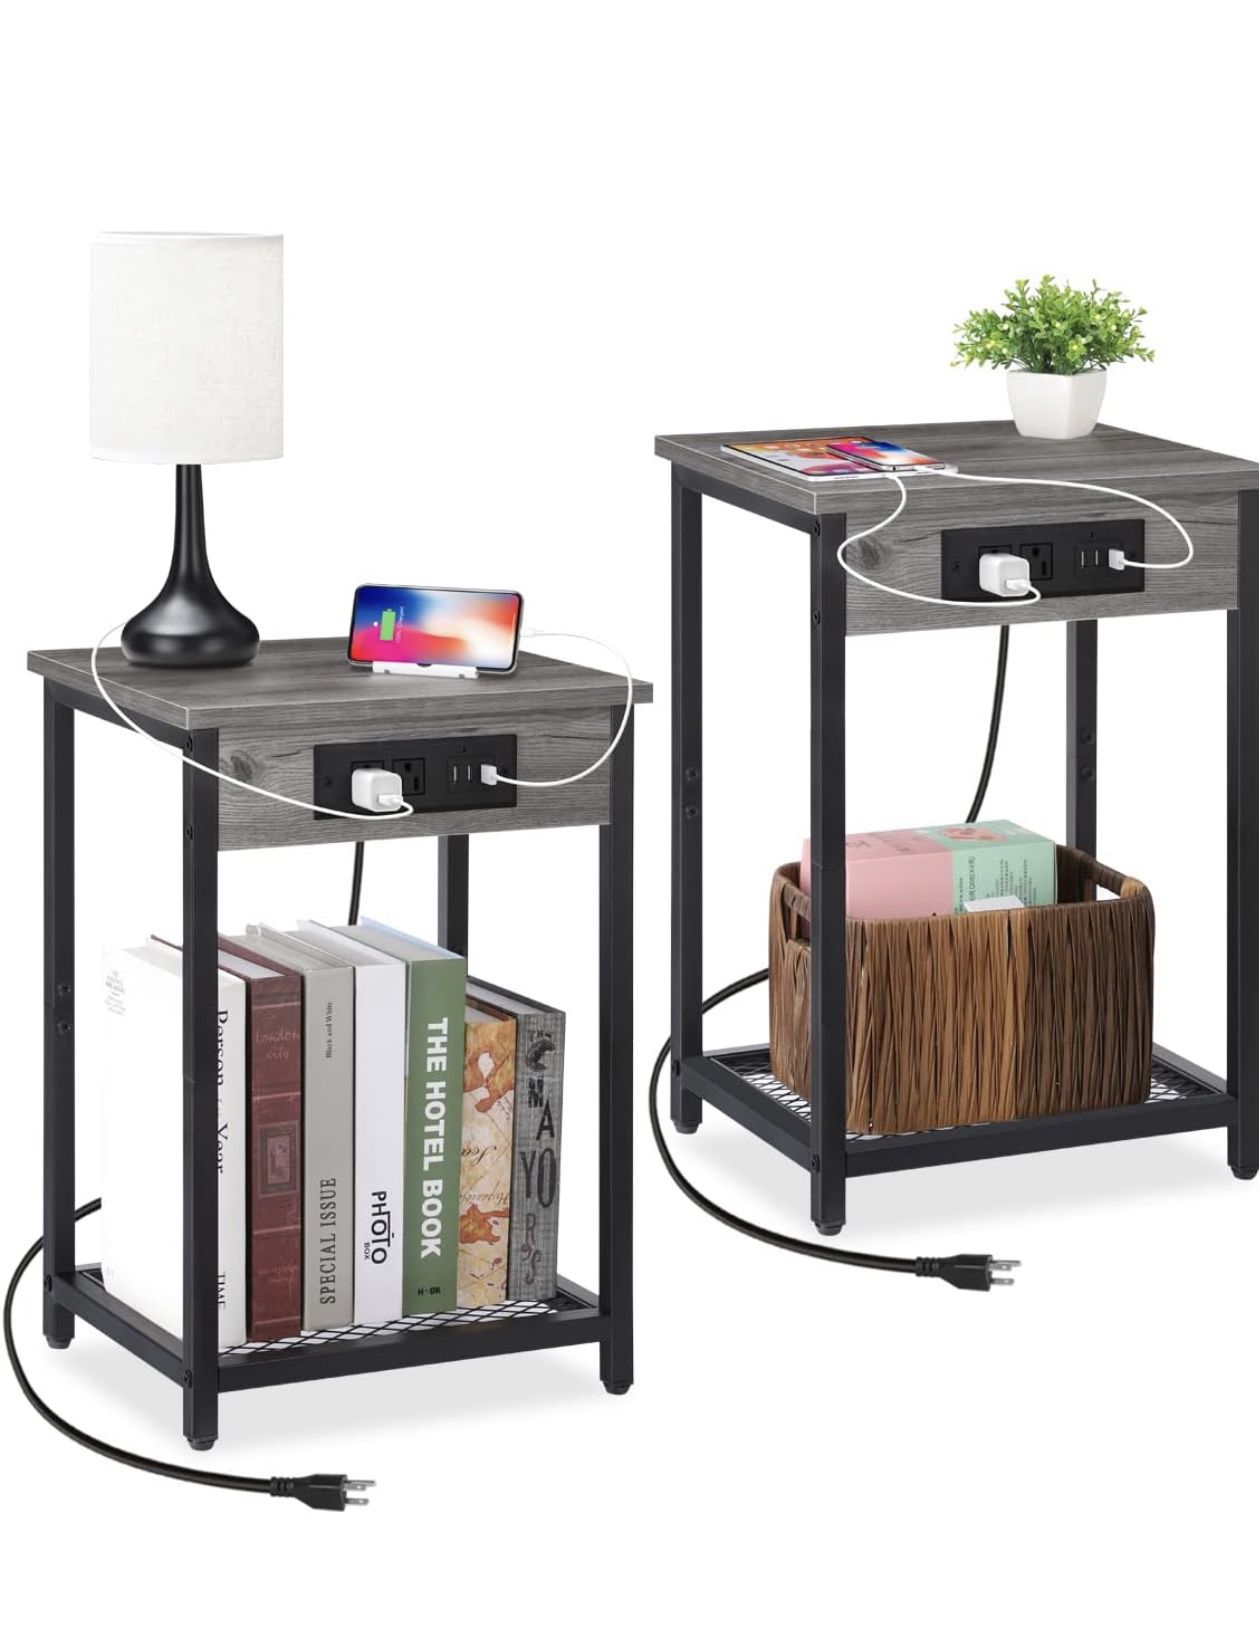 Nightstands 2 with Charging Station, 2 Tier Bedside Table with USB Ports and Outlets, Narrow End Table with Storage Shelf, Side Tables fo